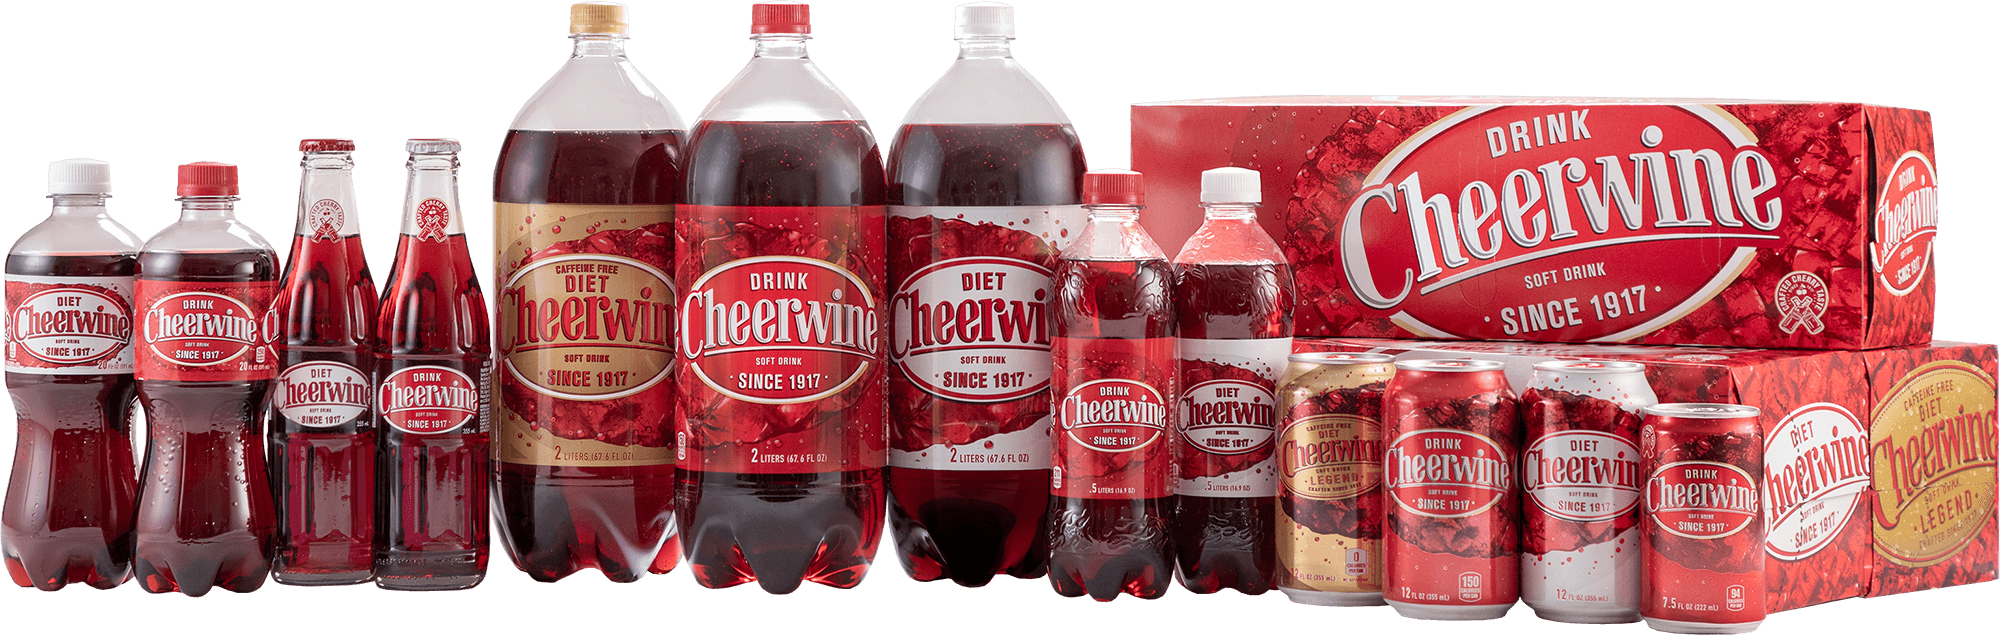 Cheerwine Cold Drinks Images